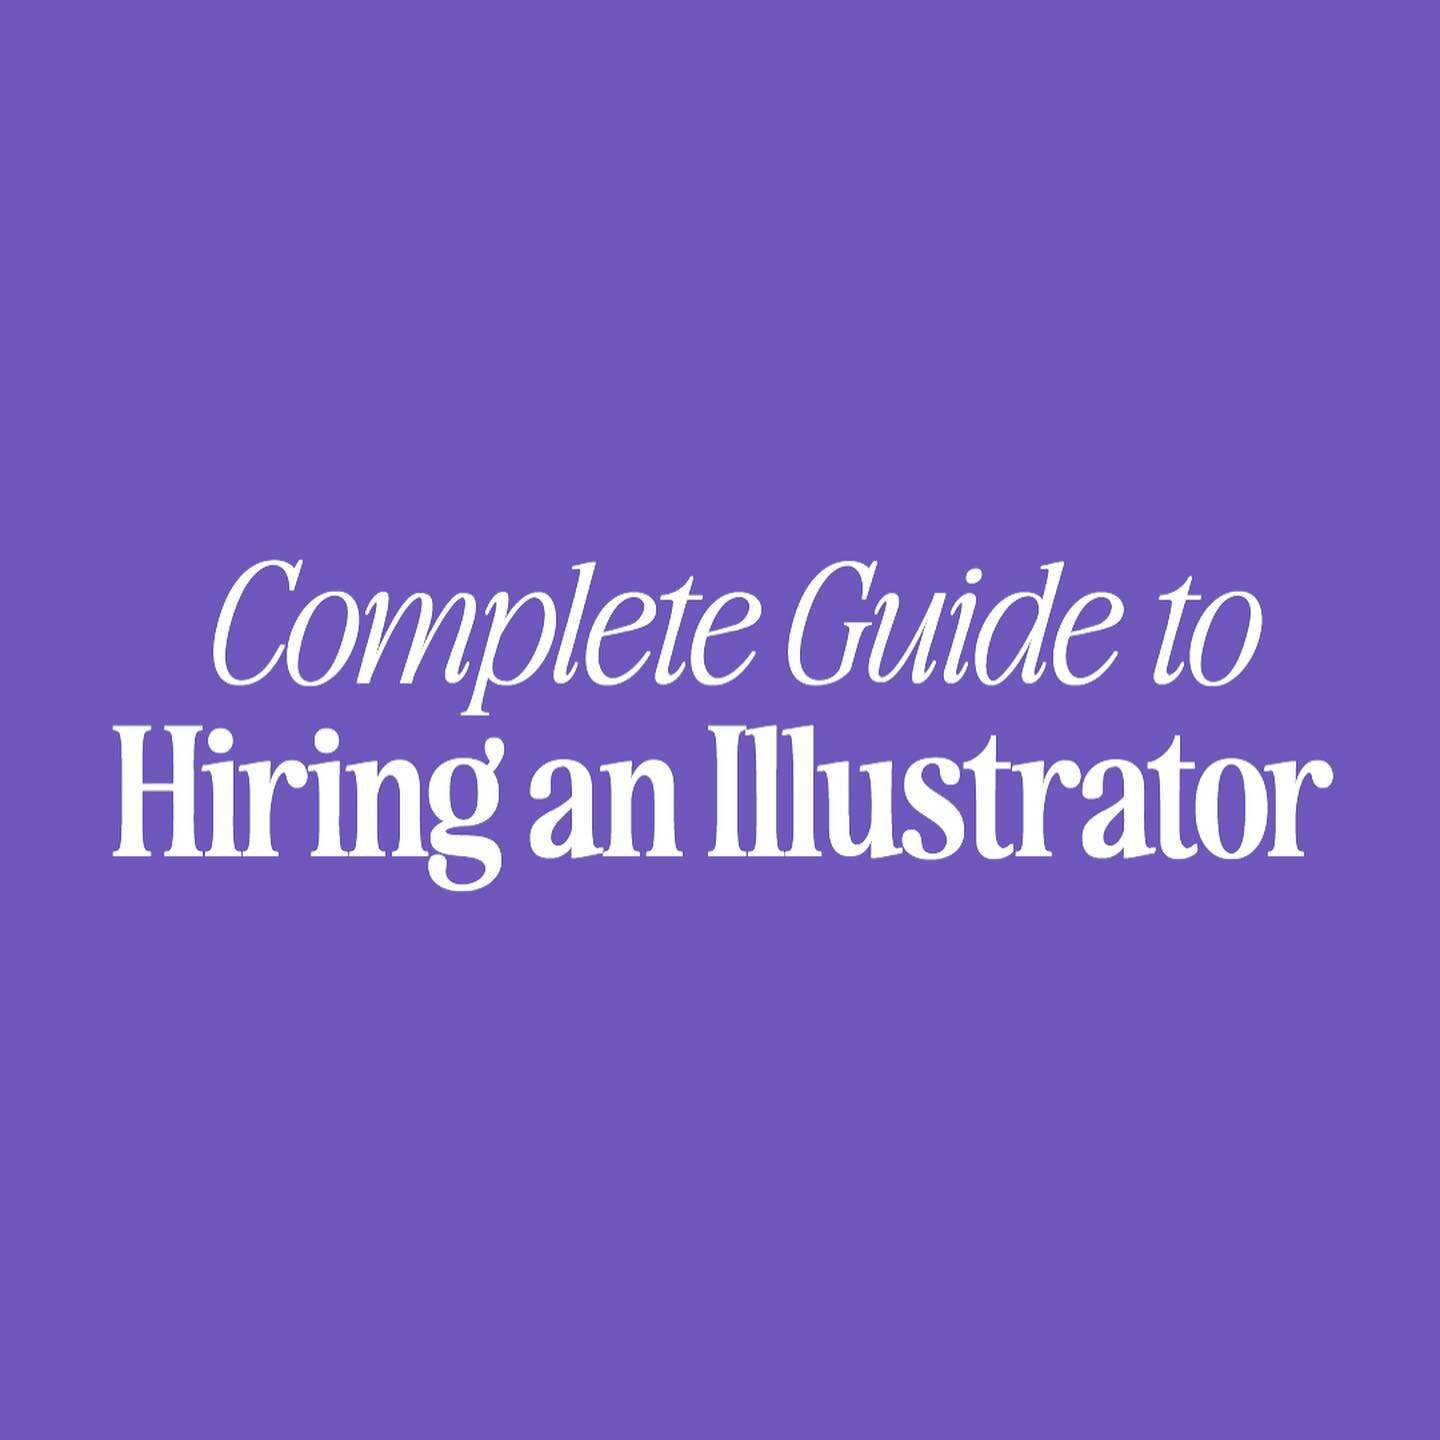 *Link in bio!!* Book covers, editorial illustrations, product designs, and more, there are so many reasons you might hire an illustrator to create unique artwork for your work or business!

#artdirector #illustratorsforhire #ArtDirectorLife #Creative